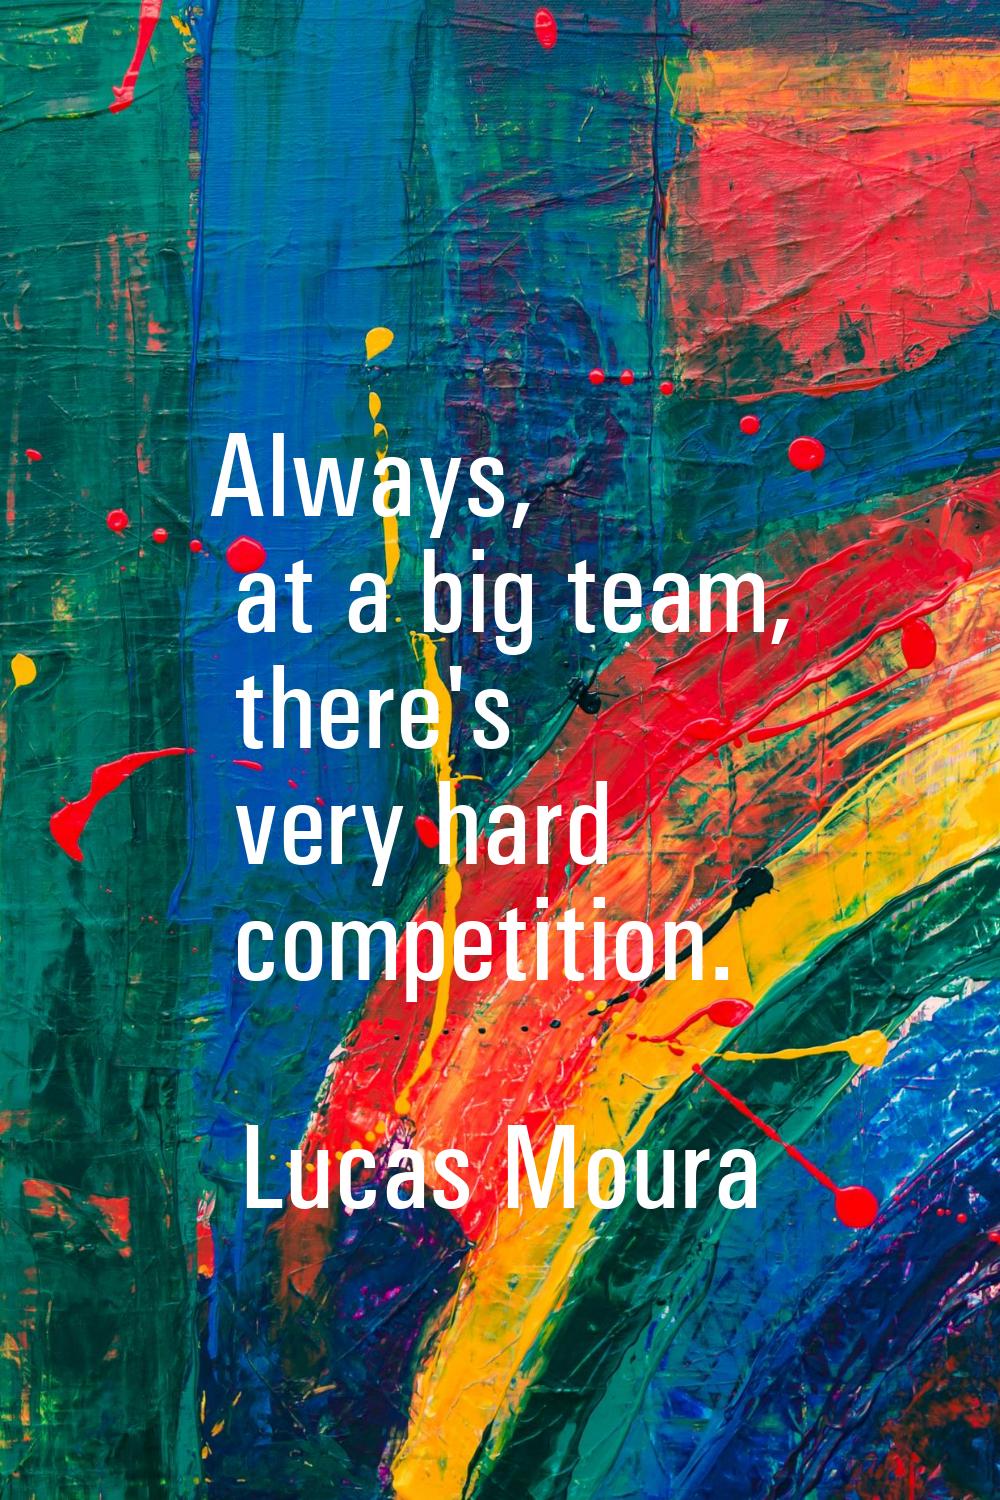 Always, at a big team, there's very hard competition.